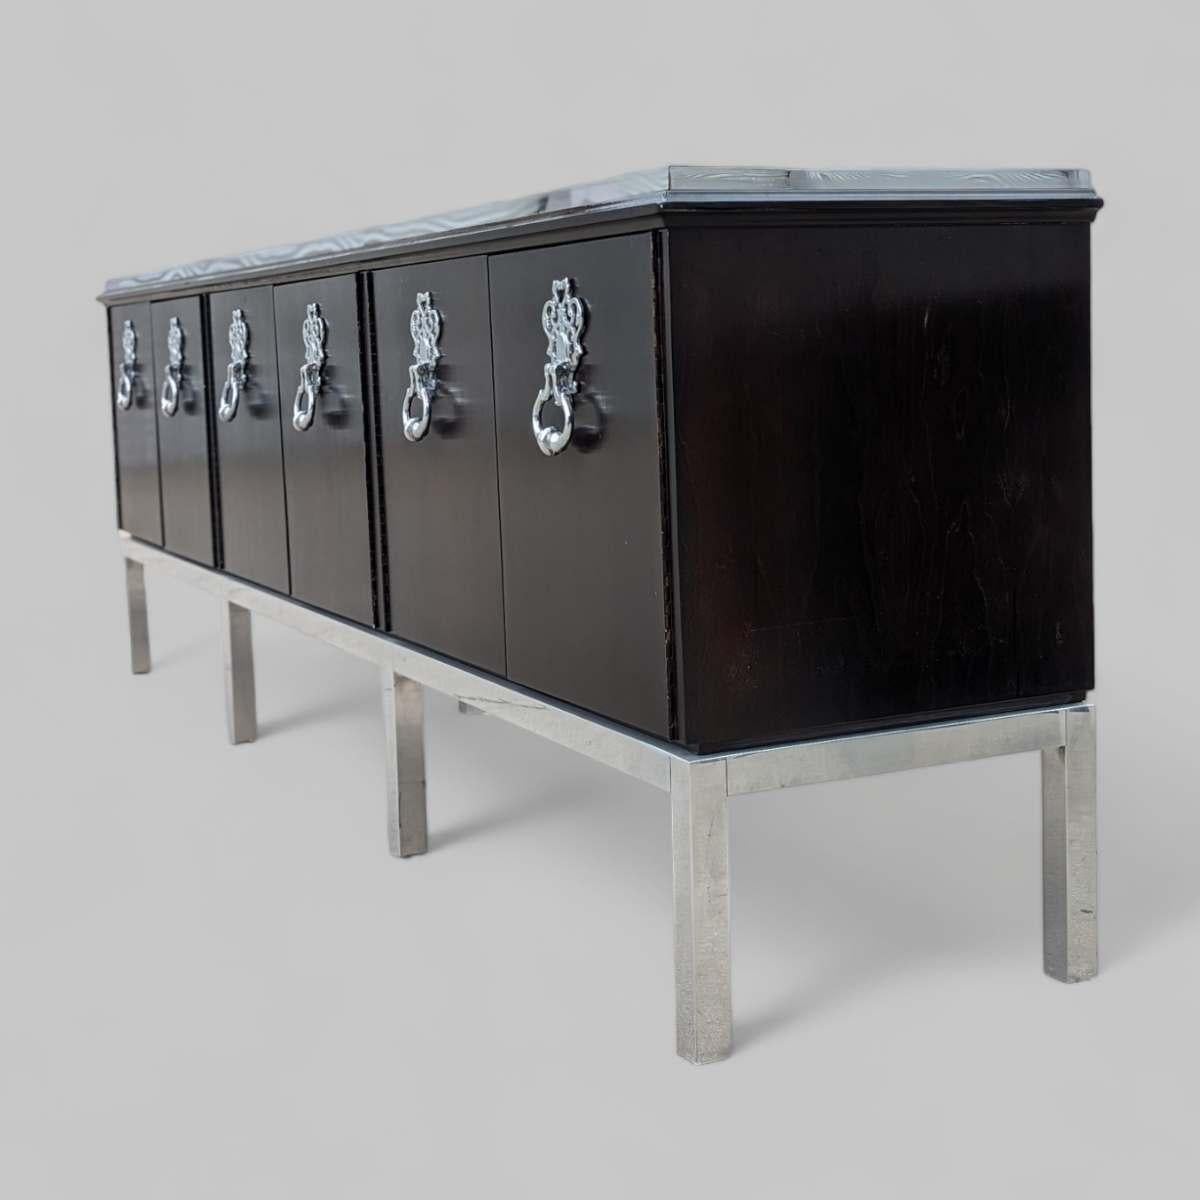 Chrome Mid Century Modern Tommi Parzinger Sideboard with Ornate Hardware For Sale